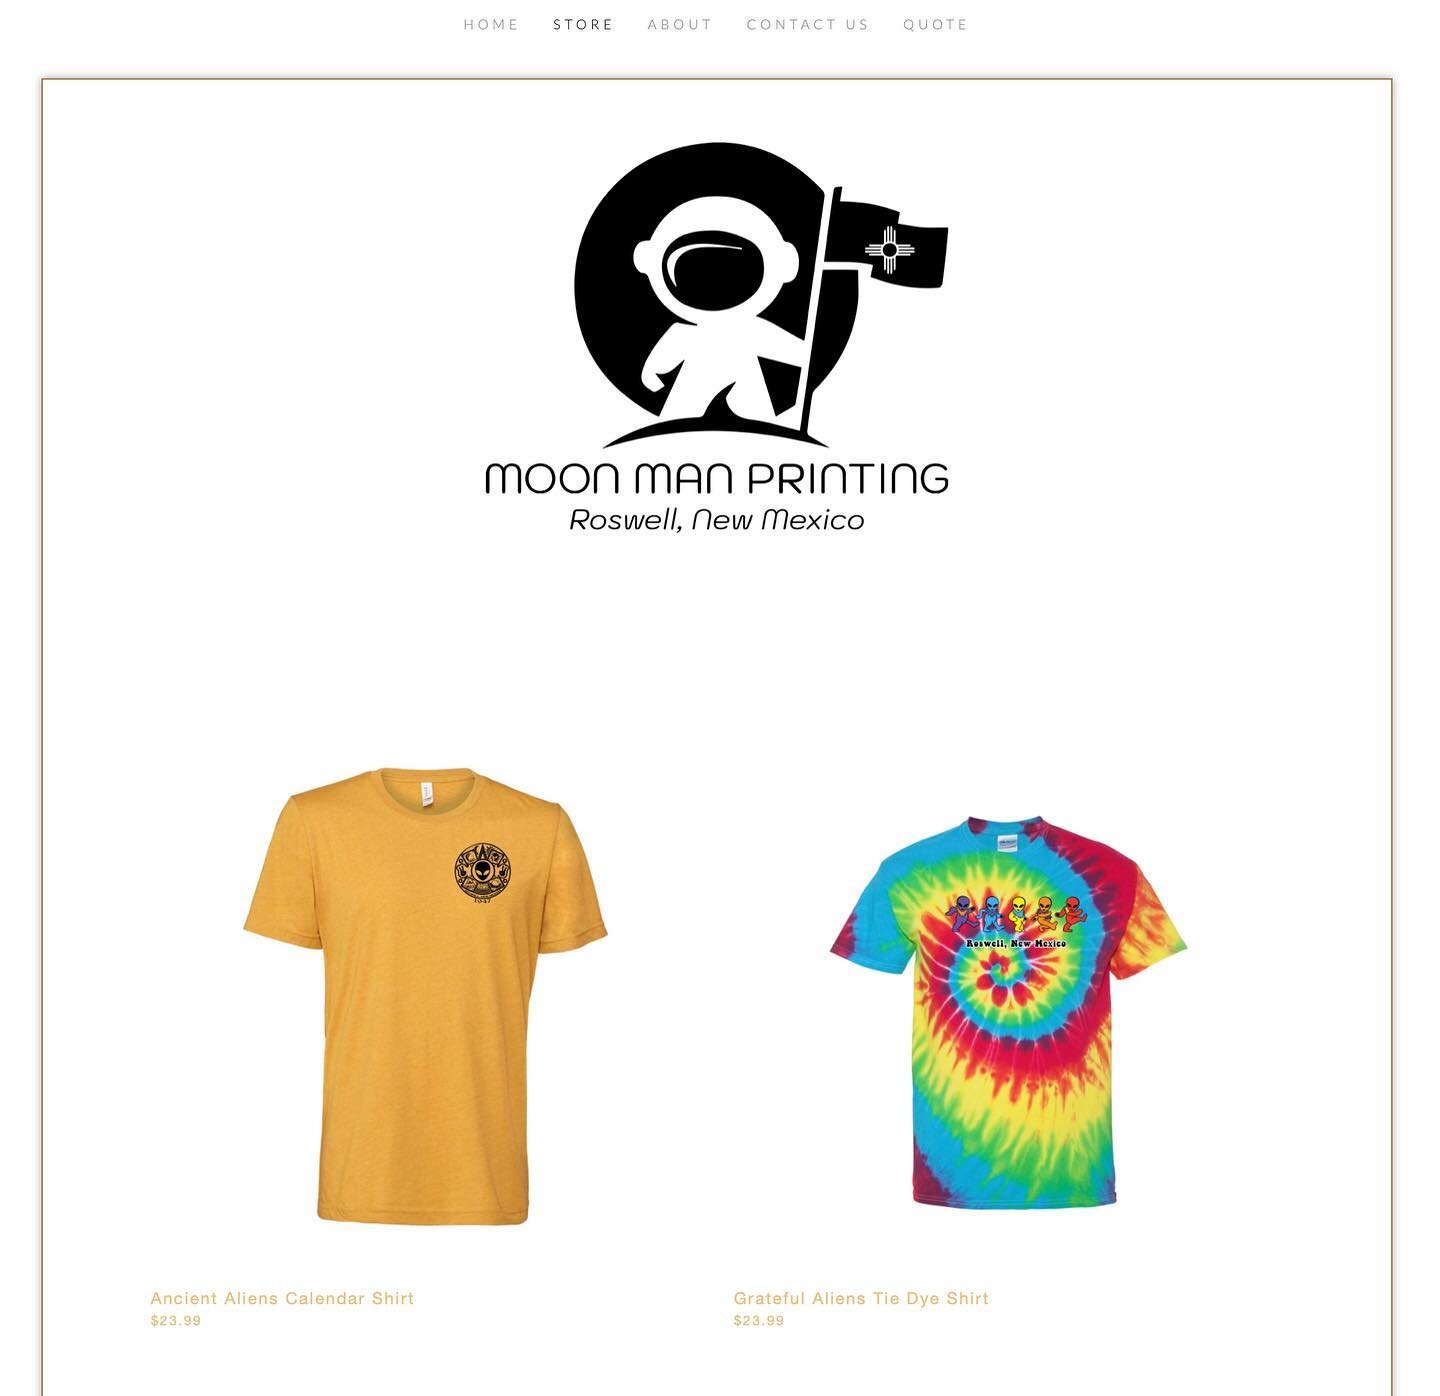 Our best sellers are now available for purchase online! 

Go to moonmanprinting.com to order today!